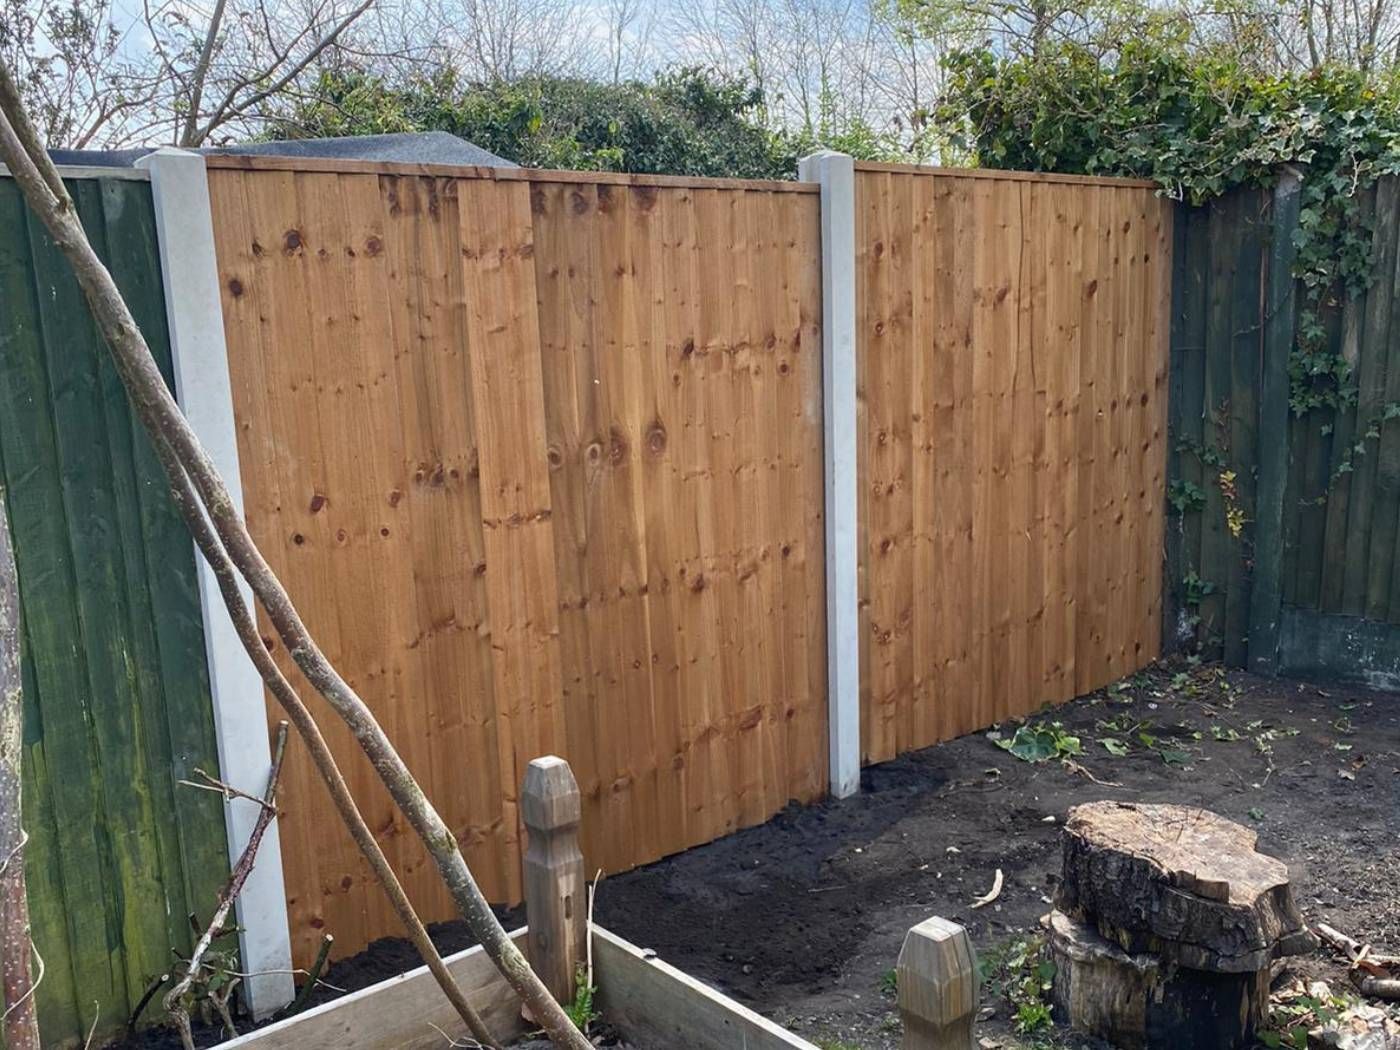 Nottingham Fencing fitted new wooden fence panels in Bulwell